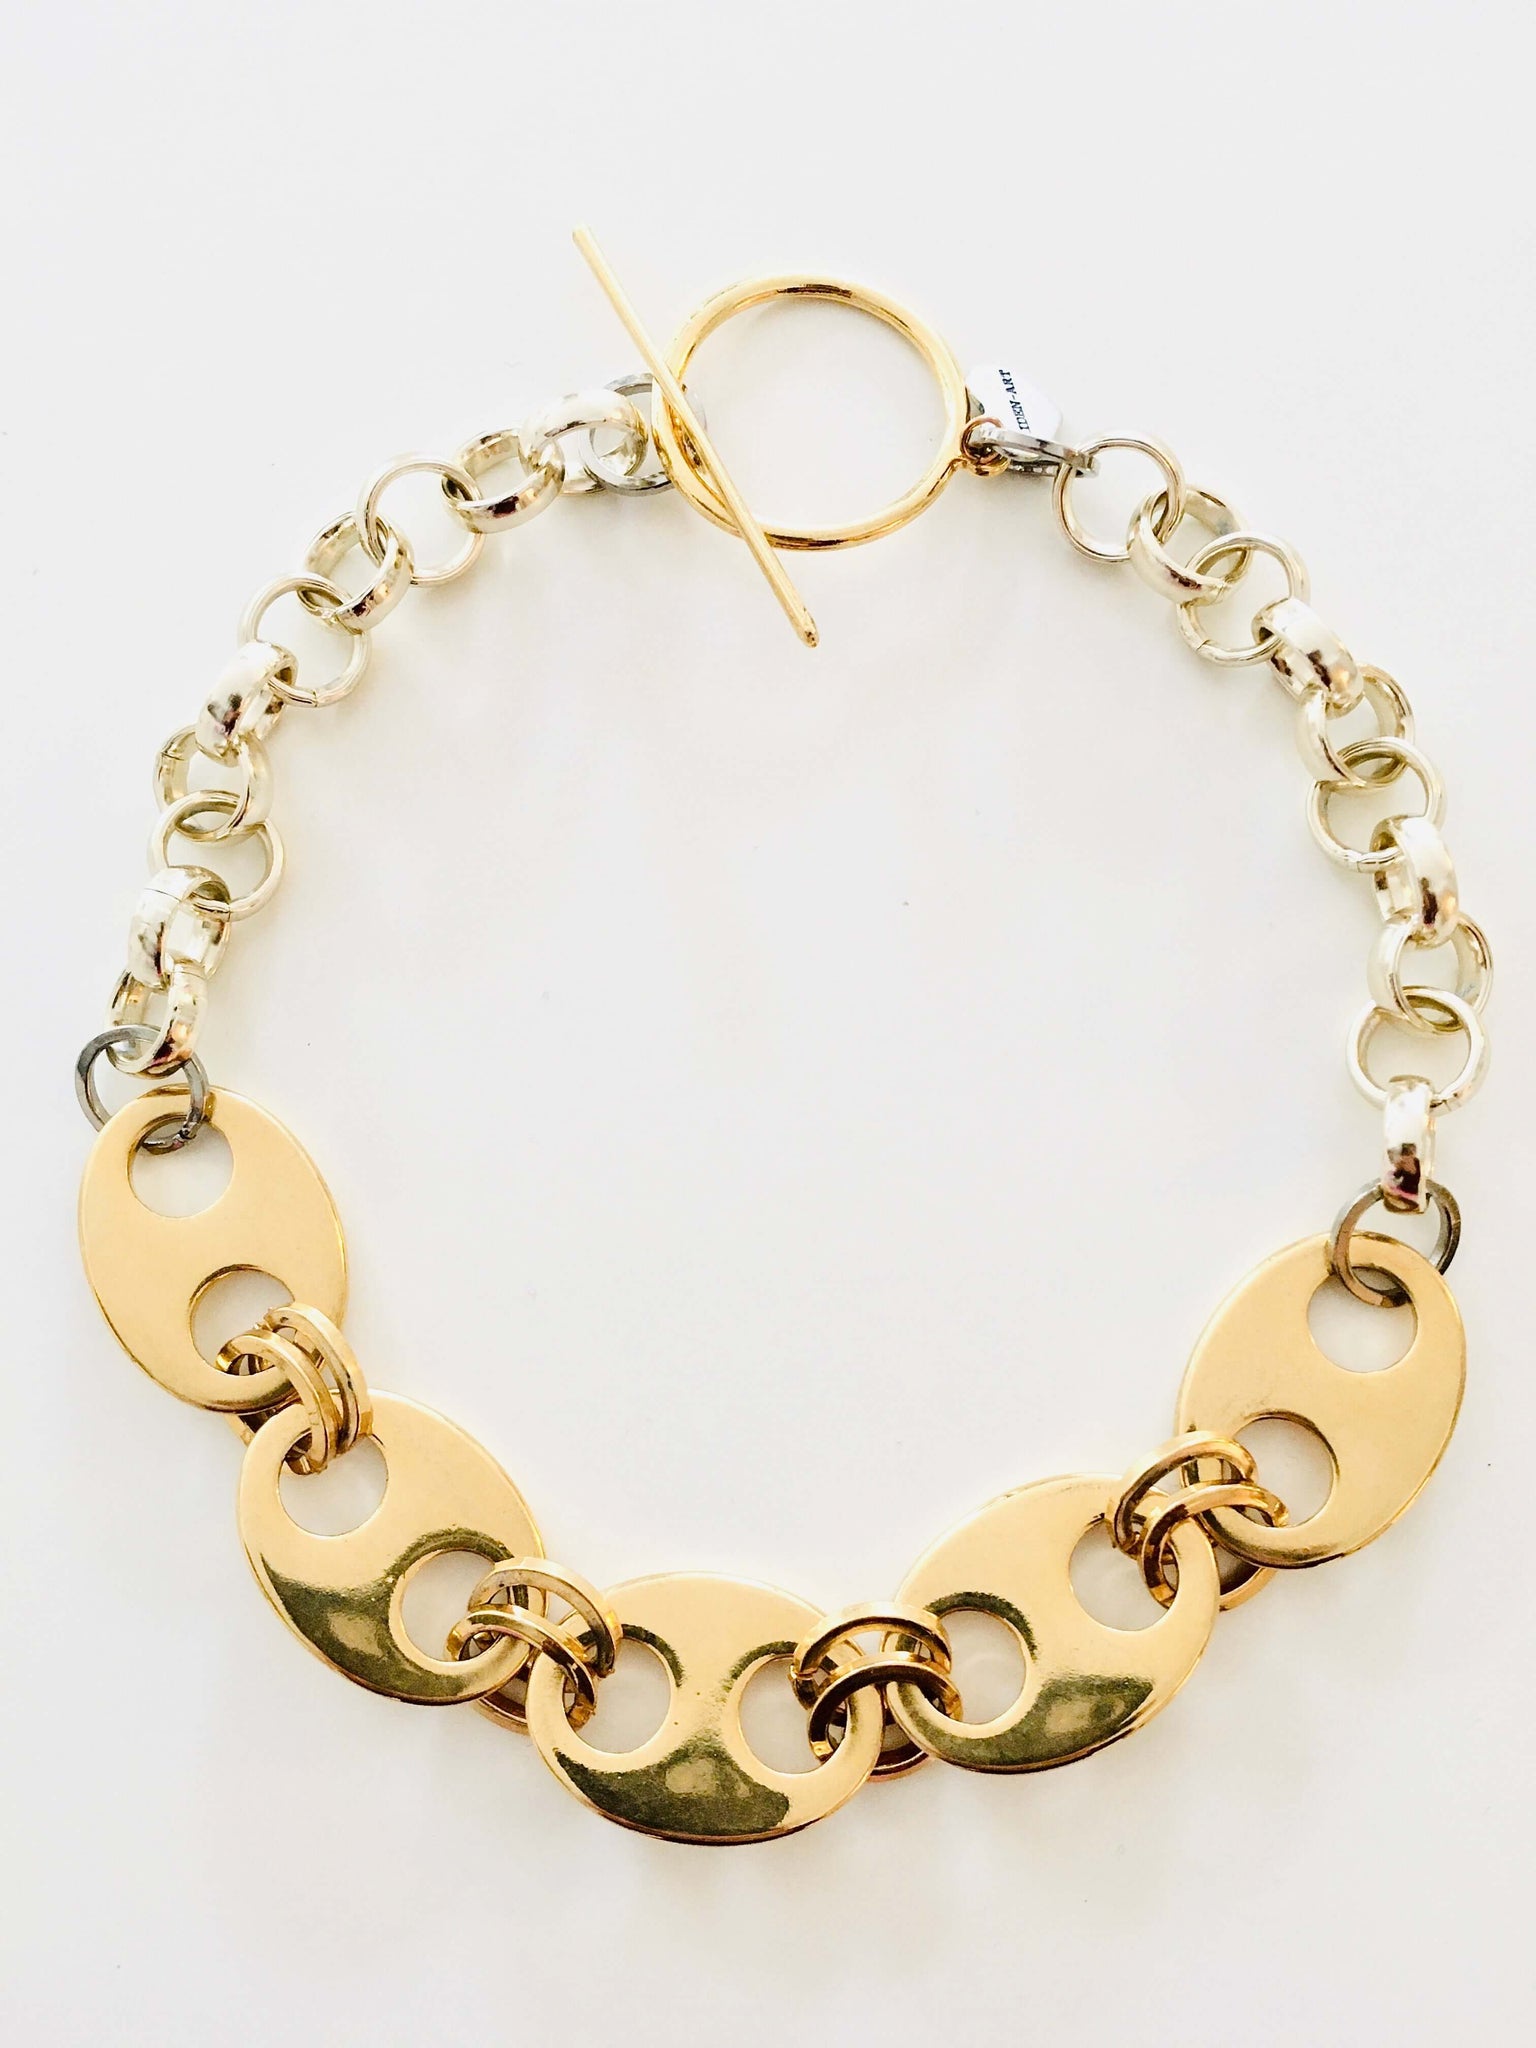 Gold Plated Oversized Marine Chain Necklace and Bracelet. - Maiden-Art